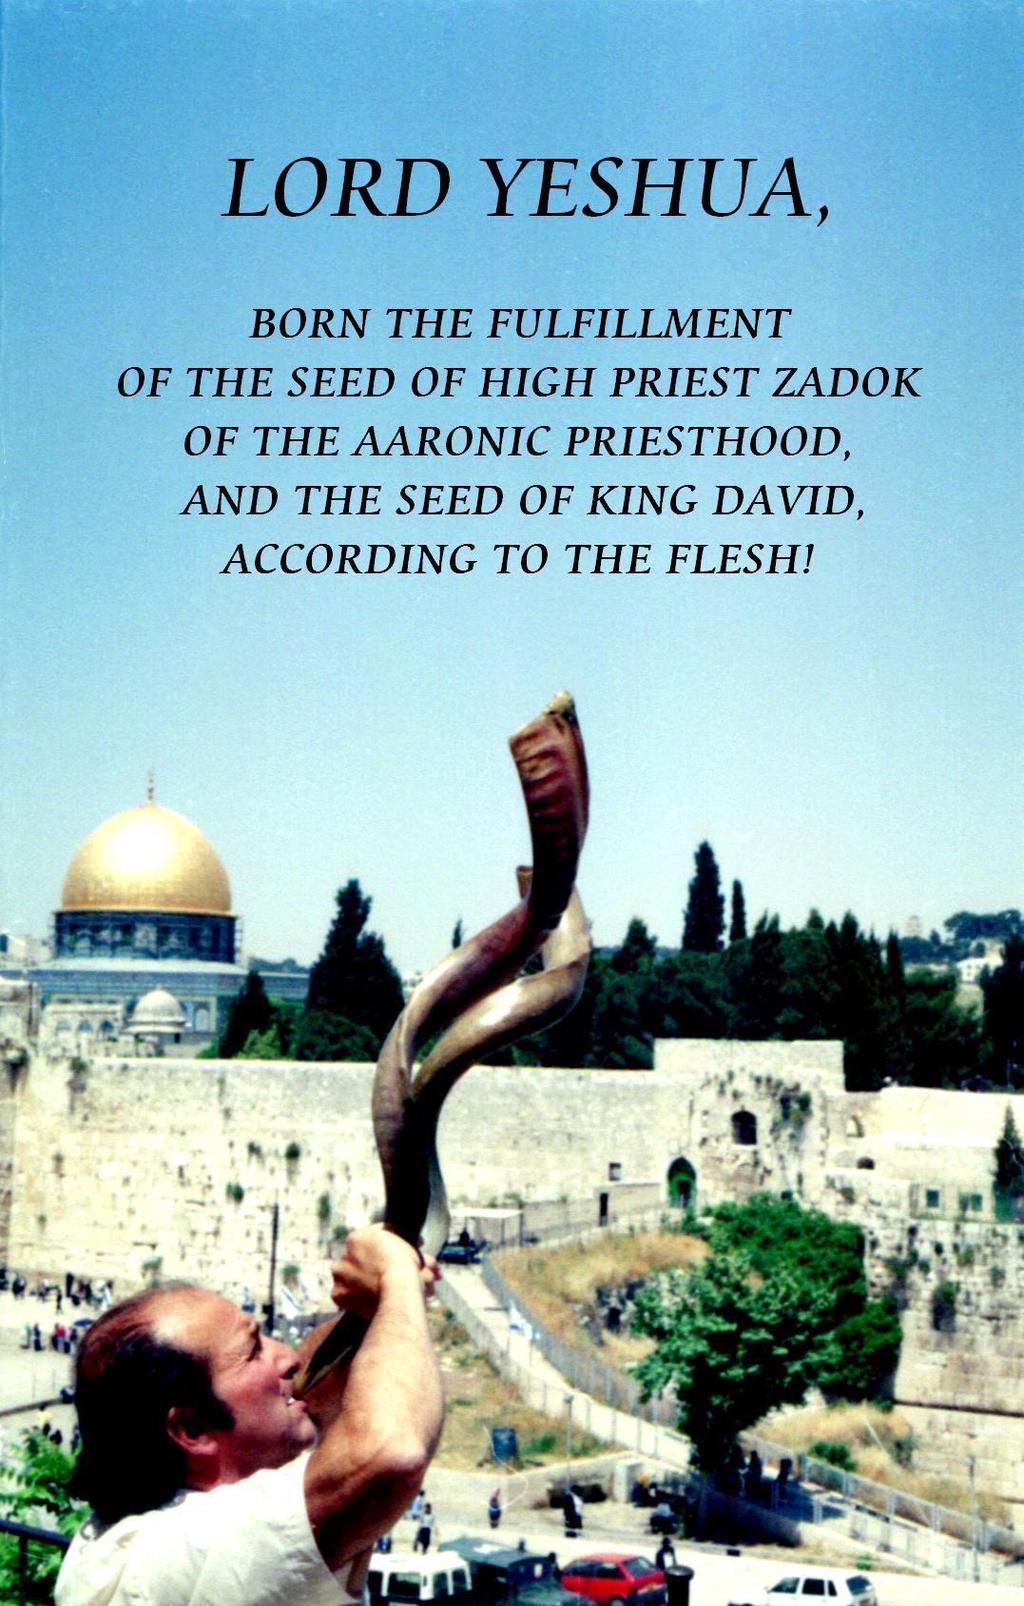 This book on LORD Yeshua is now available to download free from my website. It is 28 pages long, but only in English.